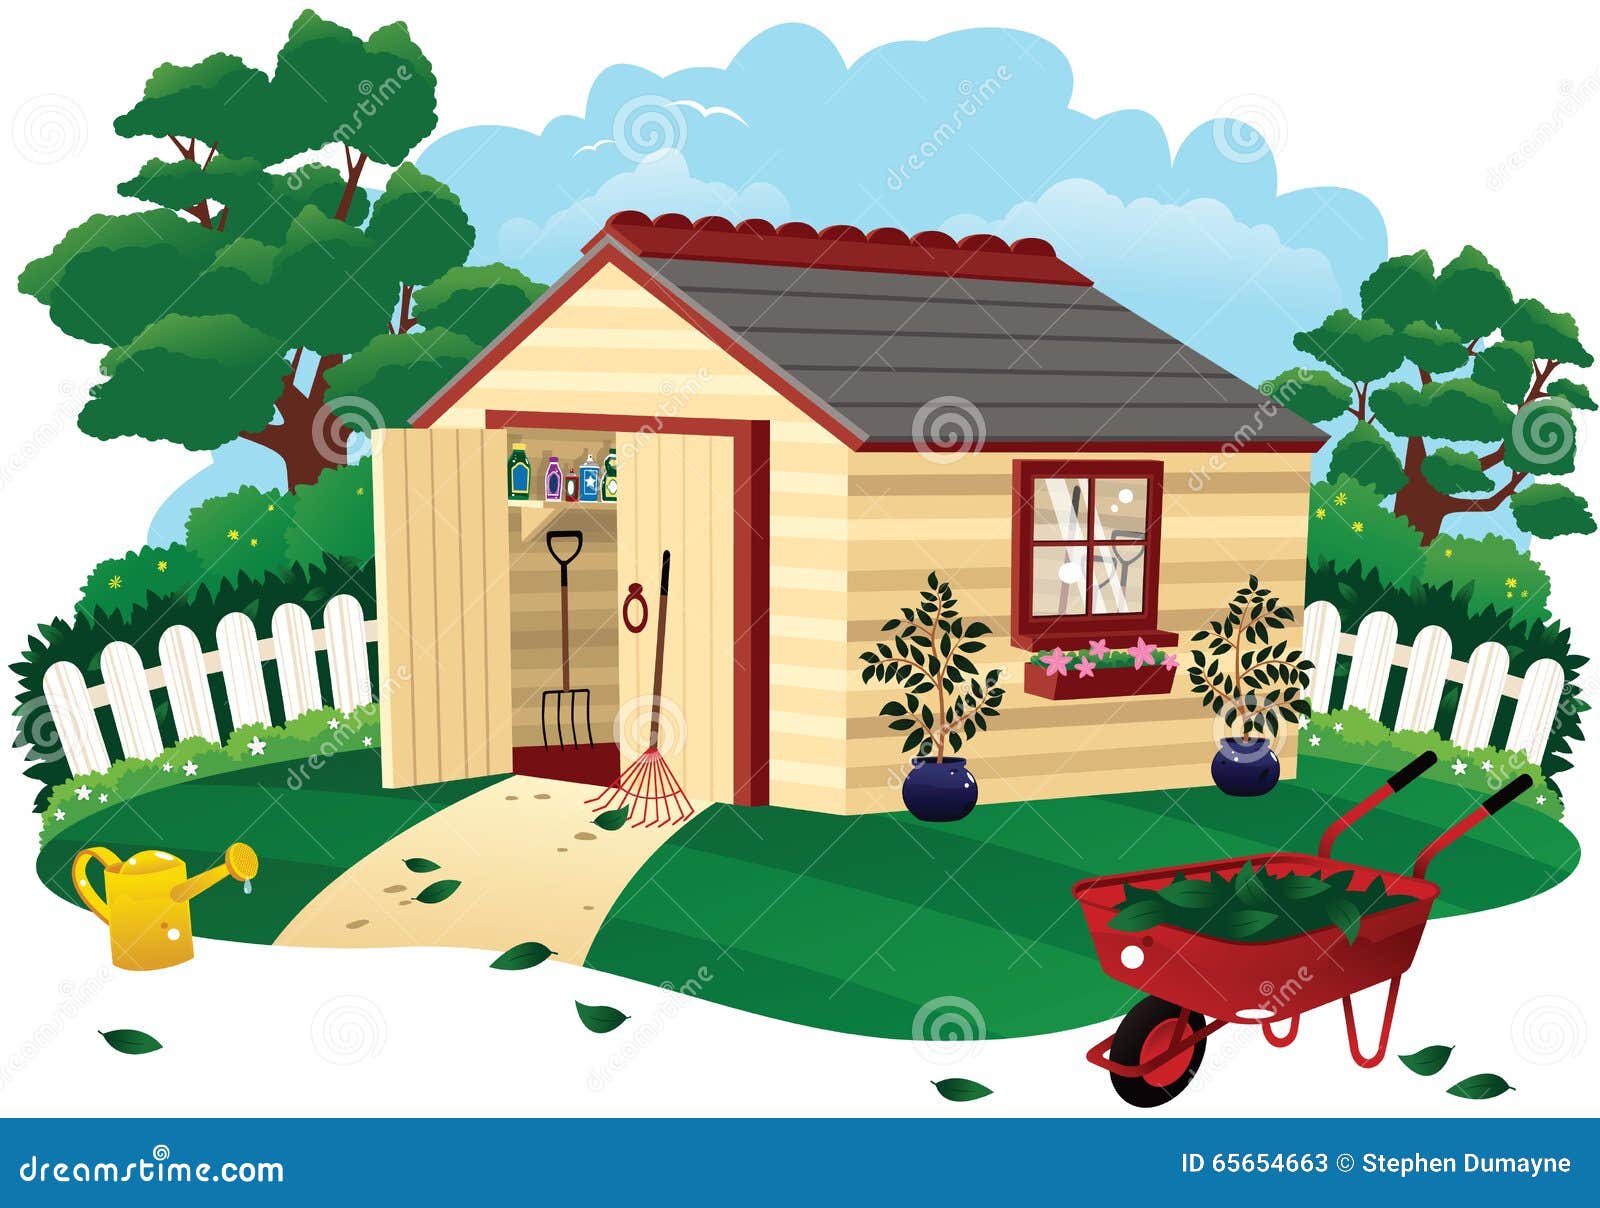 Shed Cartoons, Illustrations &amp; Vector Stock Images - 5029 